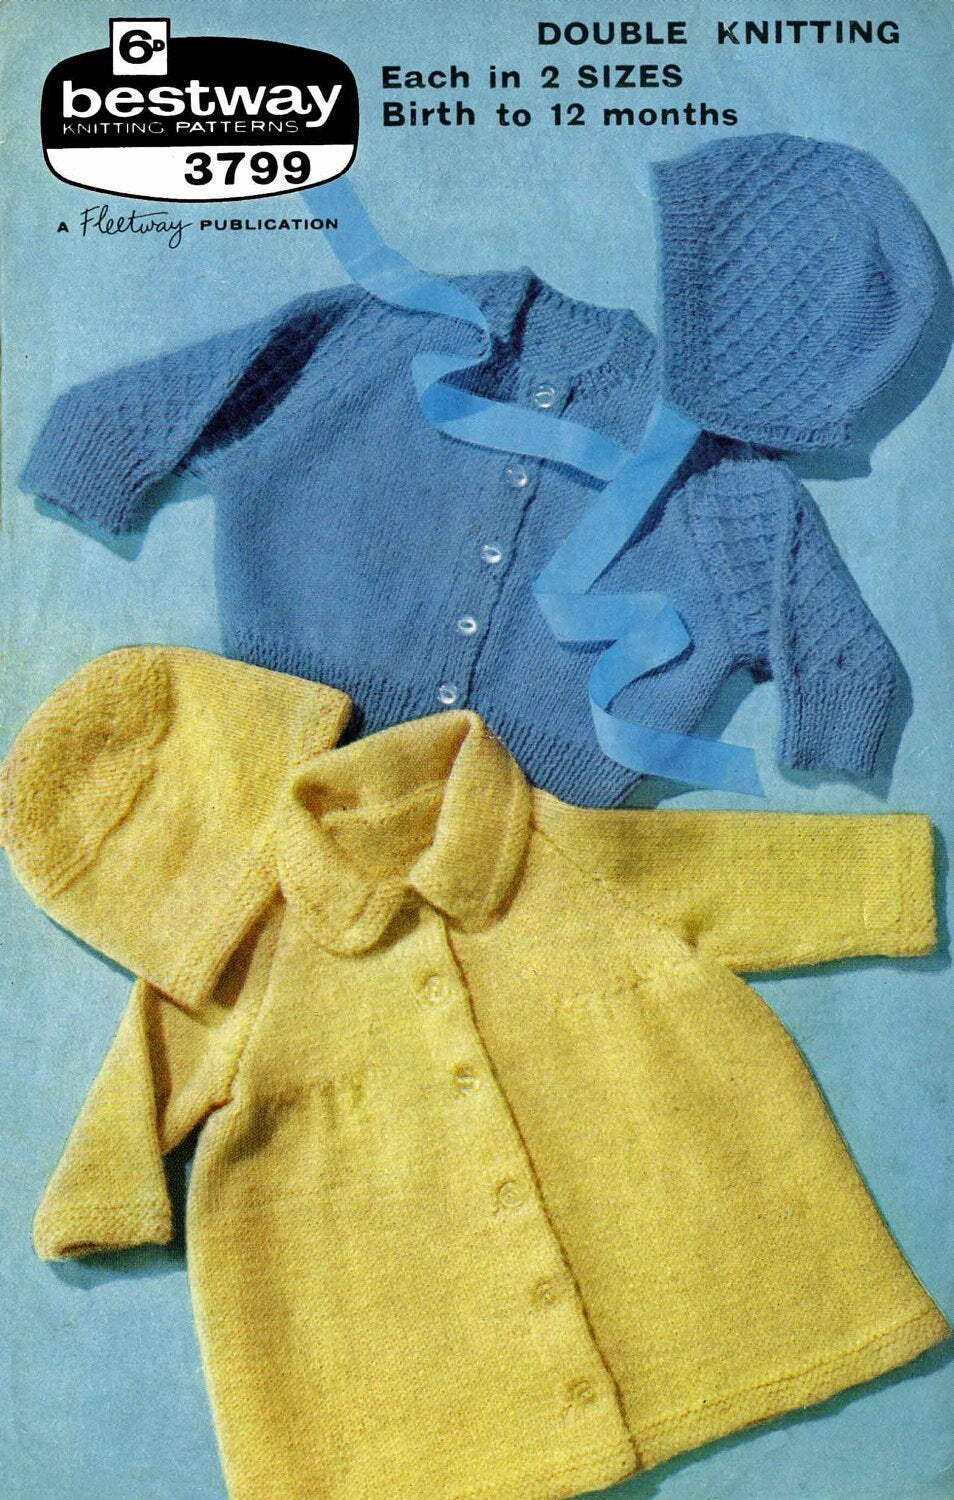 Baby Jacket / Cardigan and Bonnet in 2 Styles, Birth to 12 months, DK, 60s Knitting Pattern, Bestway 3799